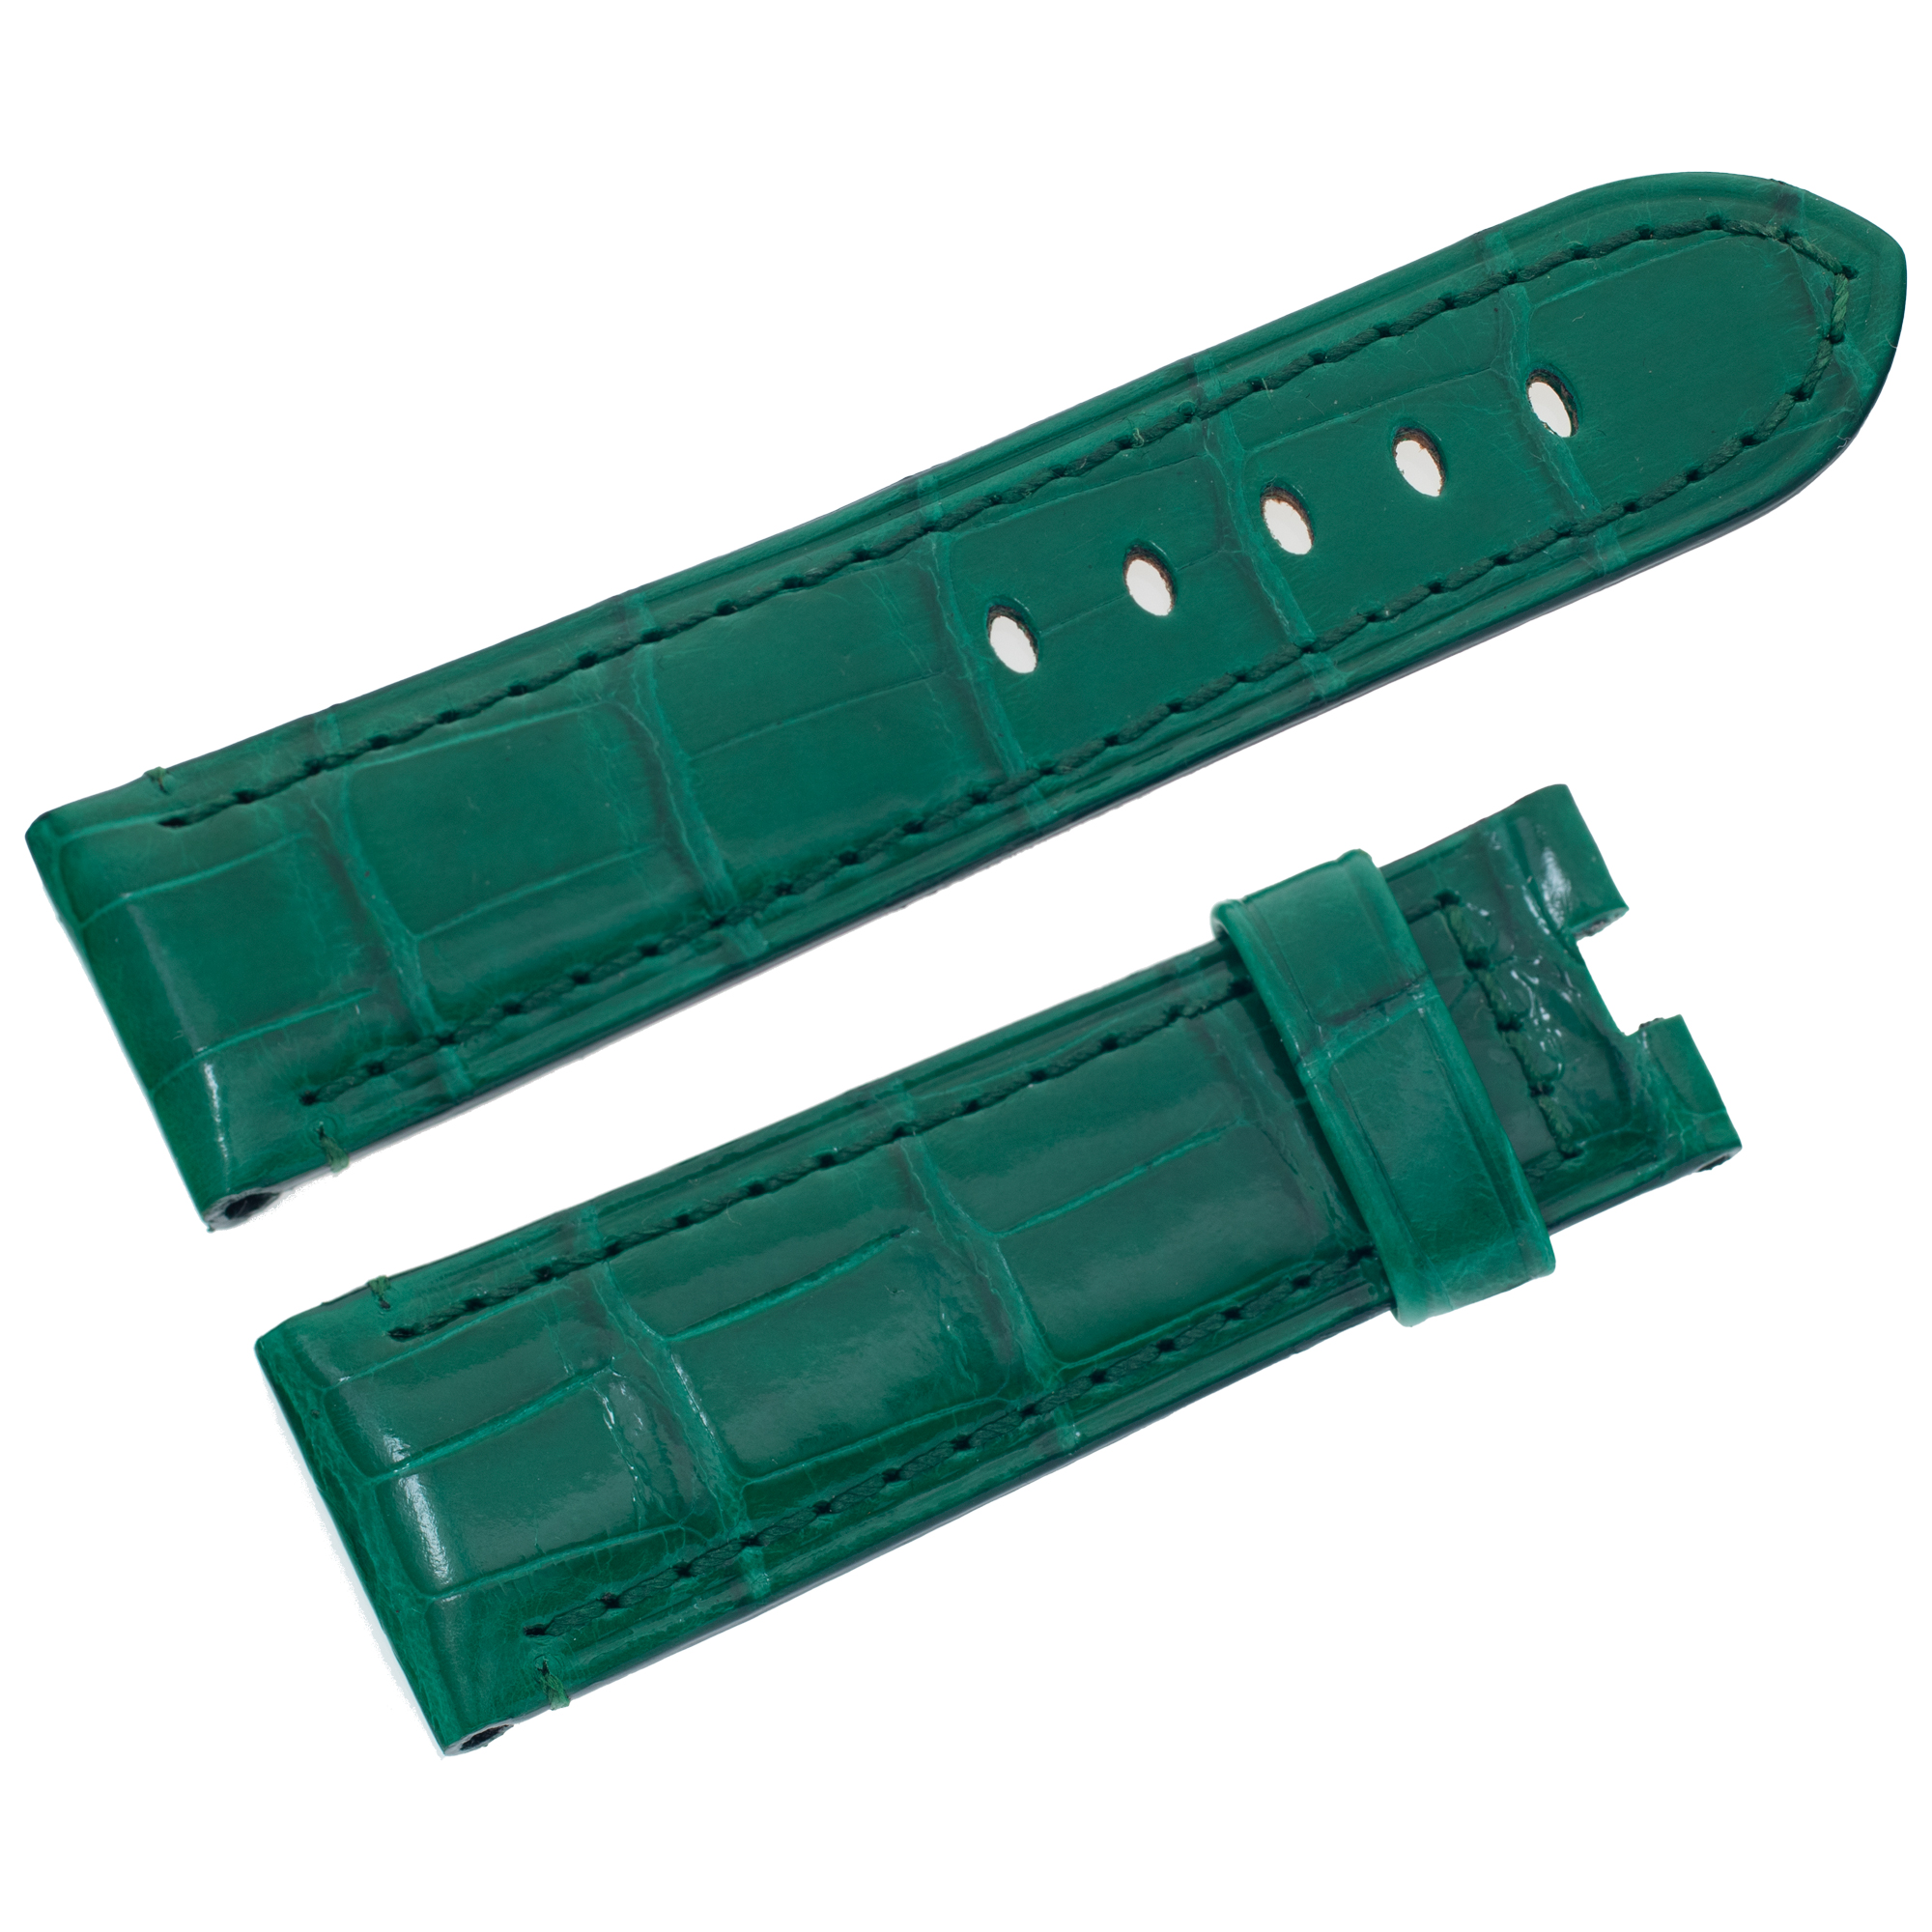 Panerai green alligator strap for tang buckle (22mm x 20mm) image 1